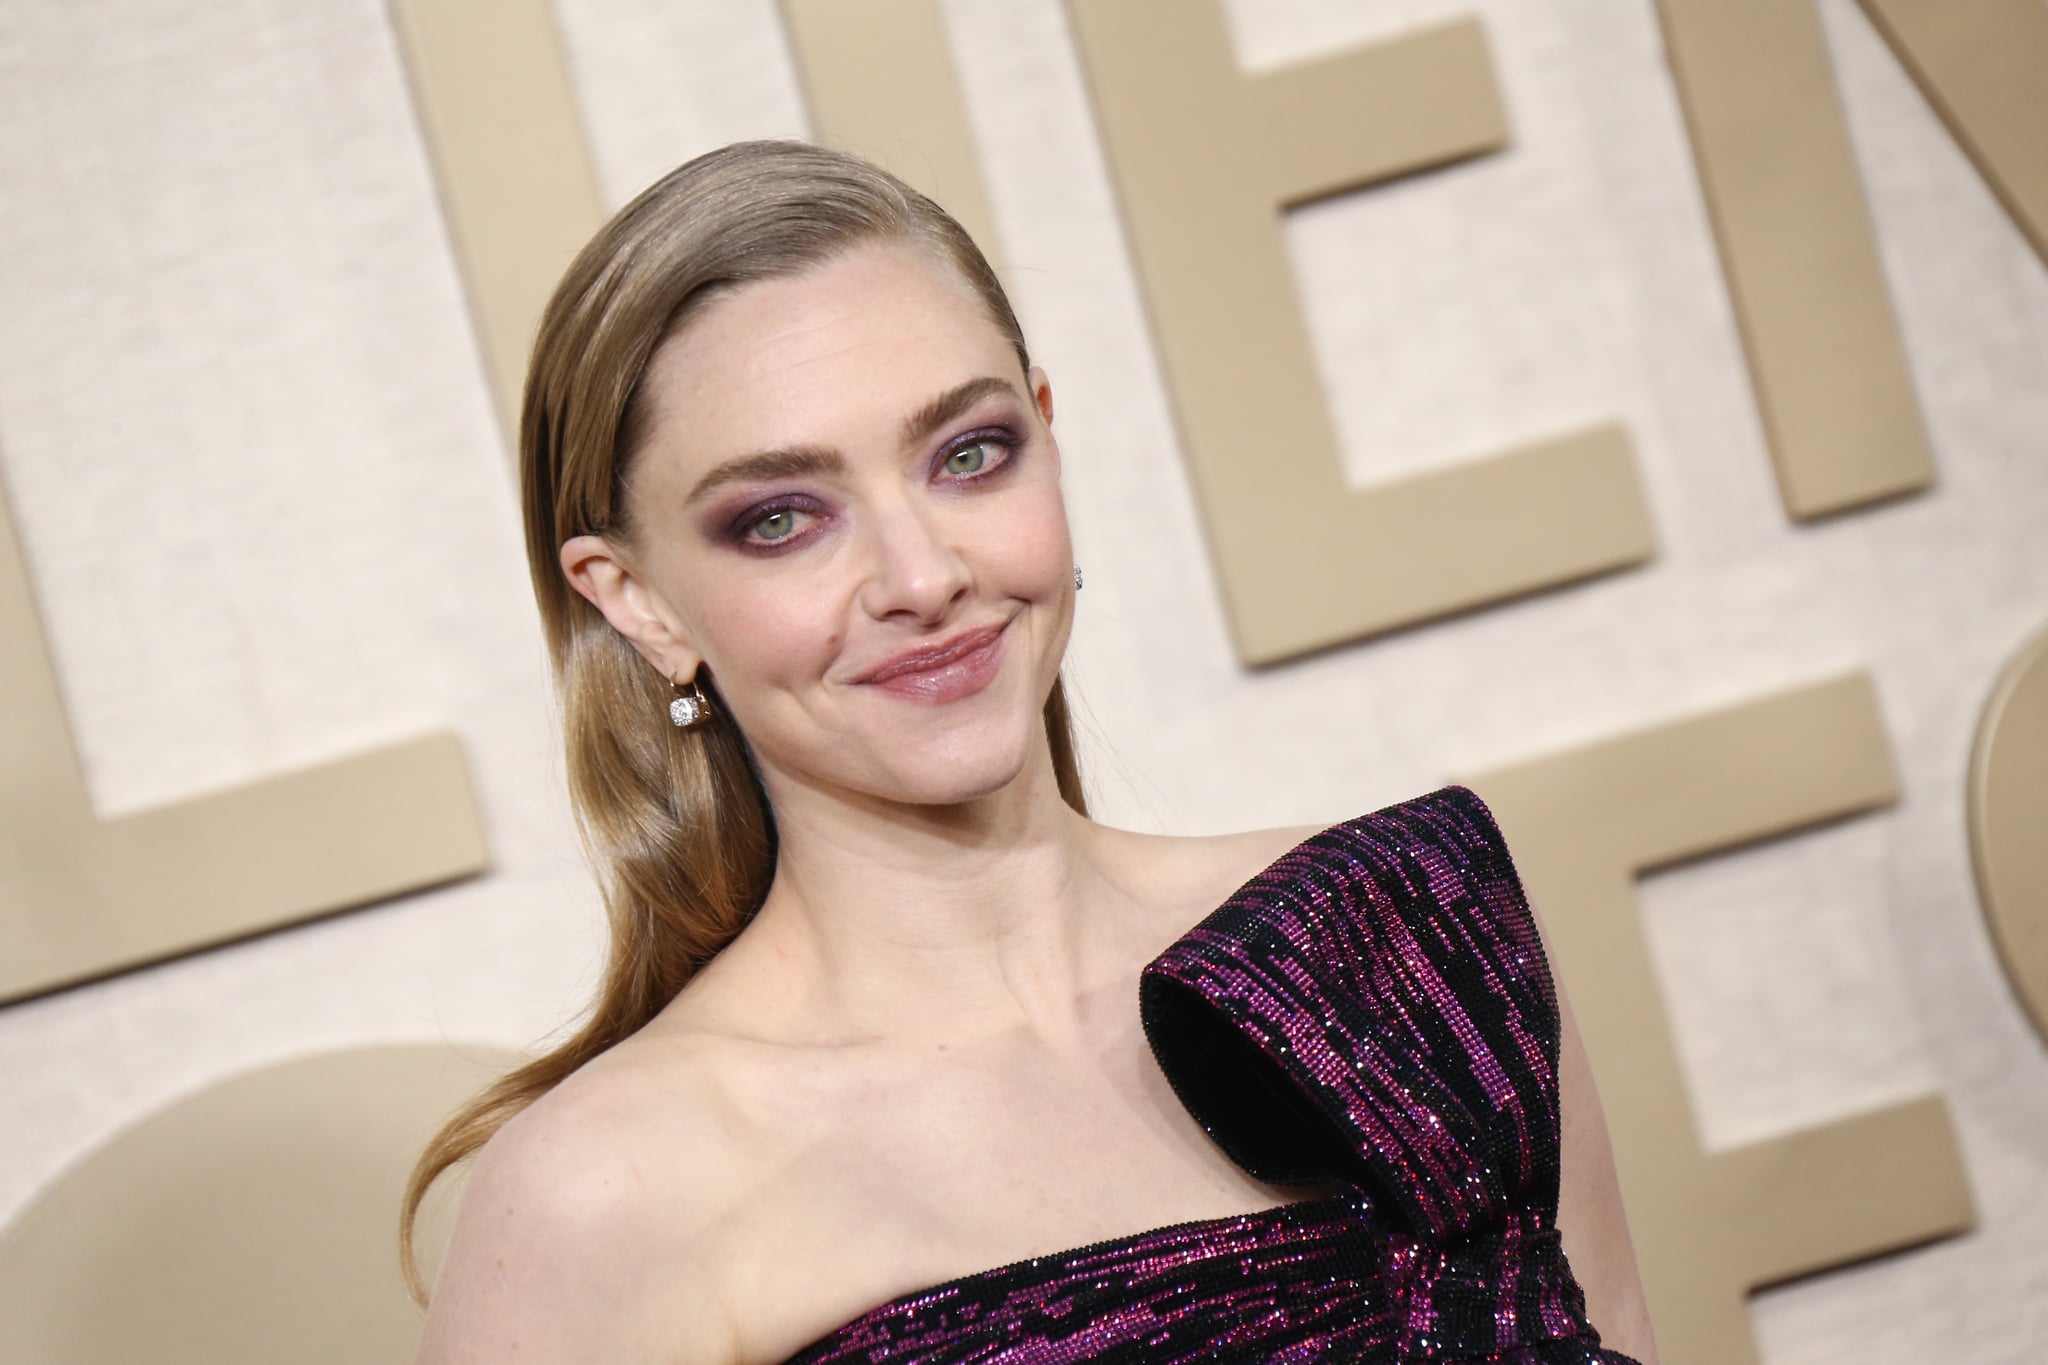 Amanda Seyfried at the 81st Golden Globe Awards held at the Beverly Hilton Hotel on January 7, 2024 in Beverly Hills, California. (Photo by Tommaso Boddi/Golden Globes 2024/Golden Globes 2024 via Getty Images)